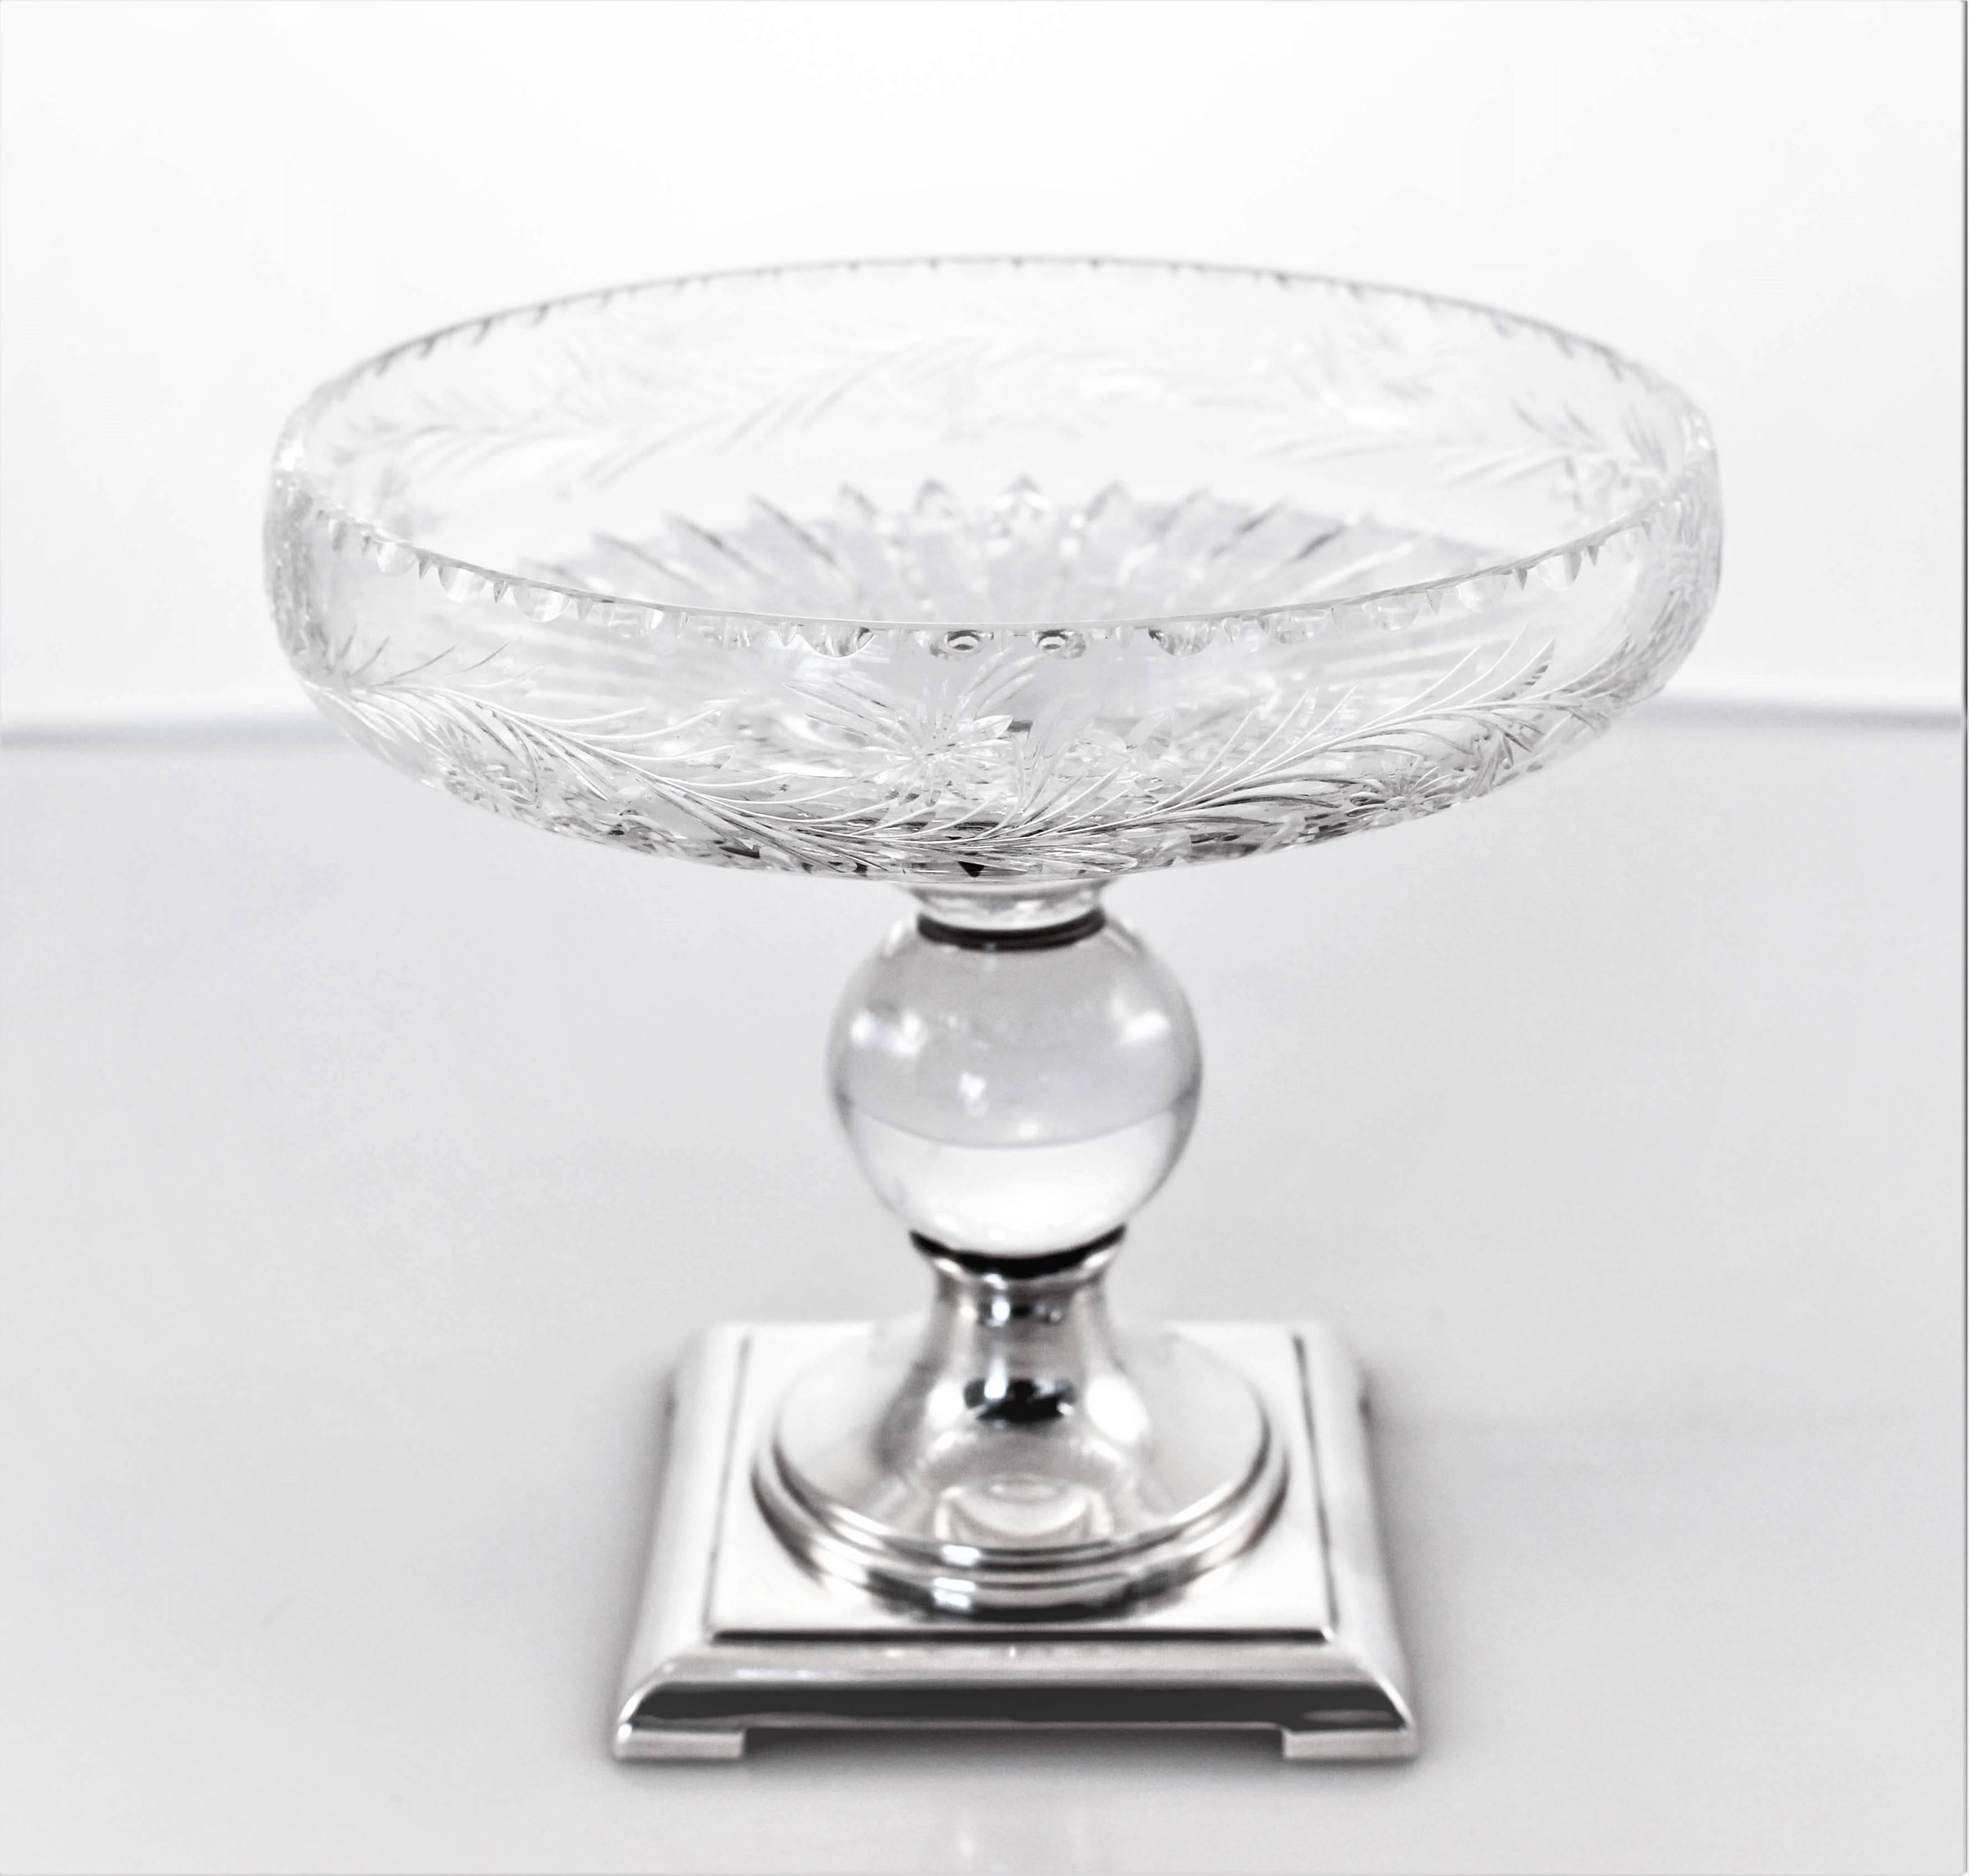 The Hawkes company was famous for manufacturing hollowware combining silver and crystal. Here we proudly offer a silver and crystal compote by Hawkes. Notice the cut glass (flowers and wreaths) around the entire circumference as well as the ridges